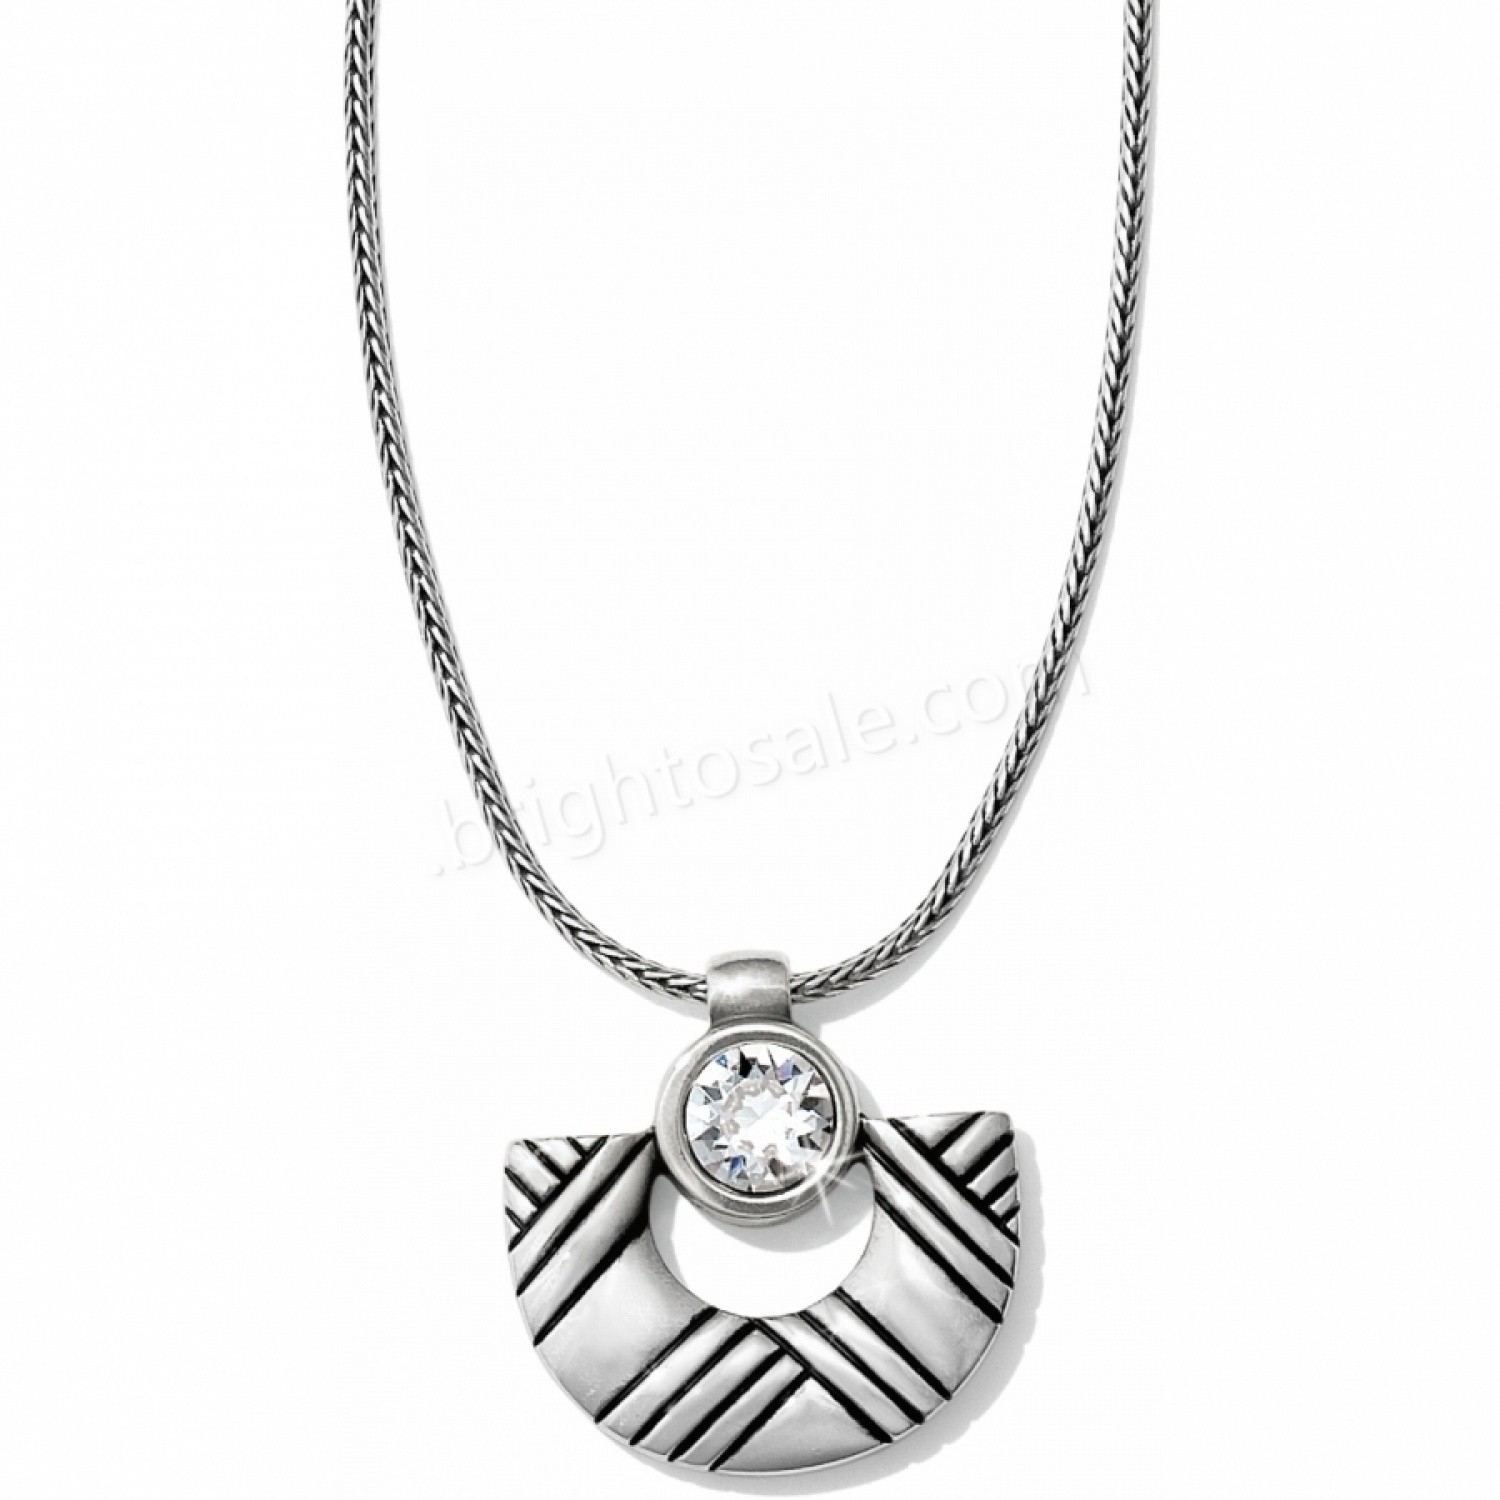 Brighton Collectibles & Online Discount Medaille Shield Necklace - Brighton Collectibles & Online Discount Medaille Shield Necklace